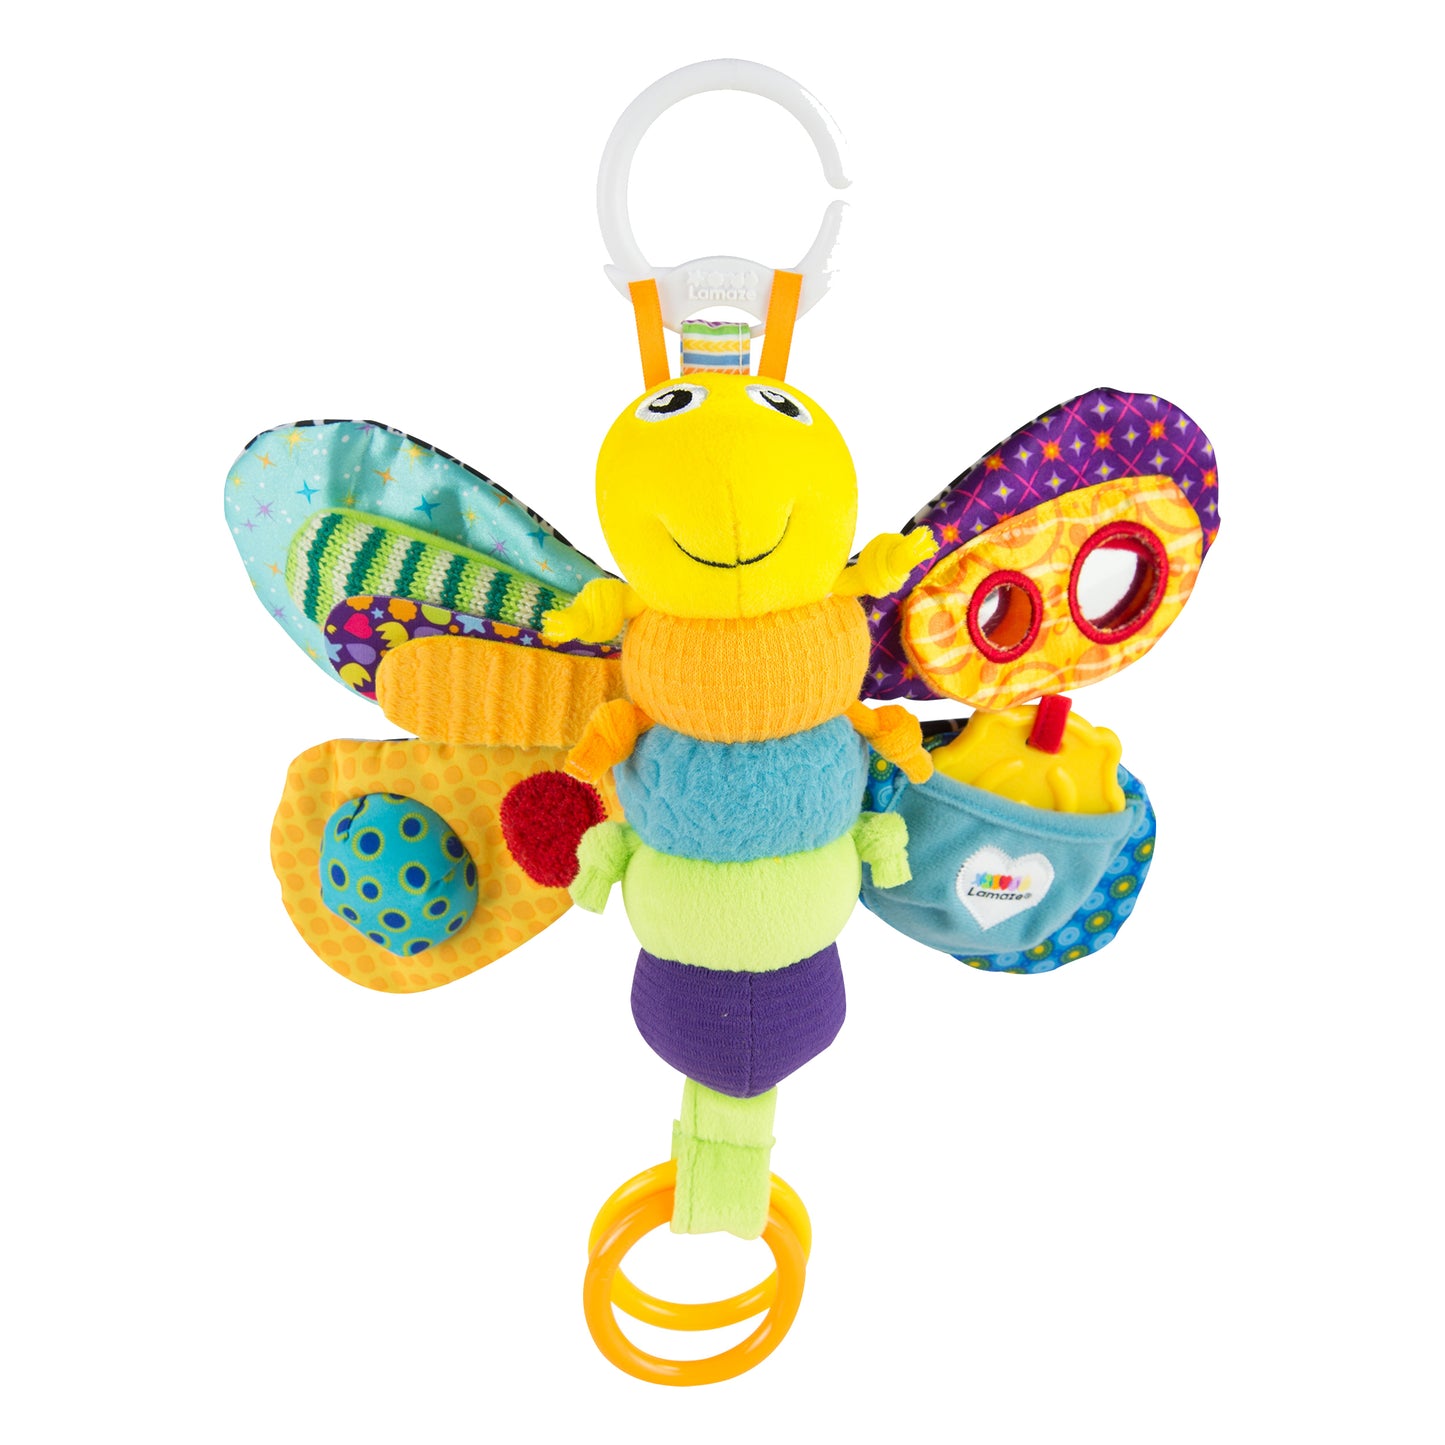 Lamaze Freddie the Firefly at Baby City